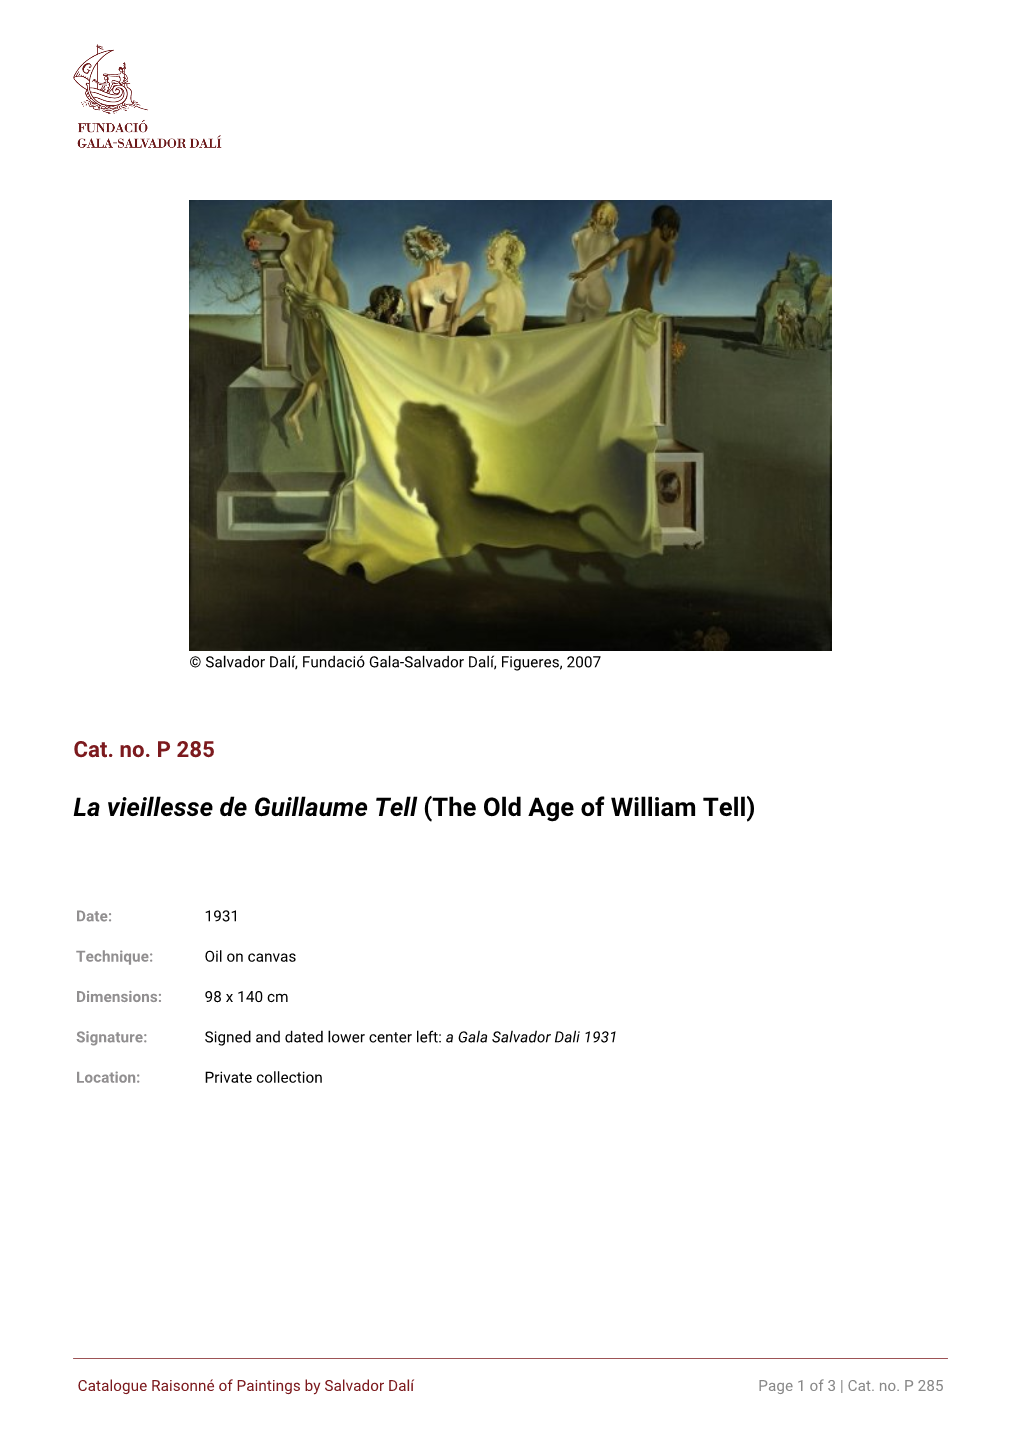 La Vieillesse De Guillaume Tell (The Old Age of William Tell)